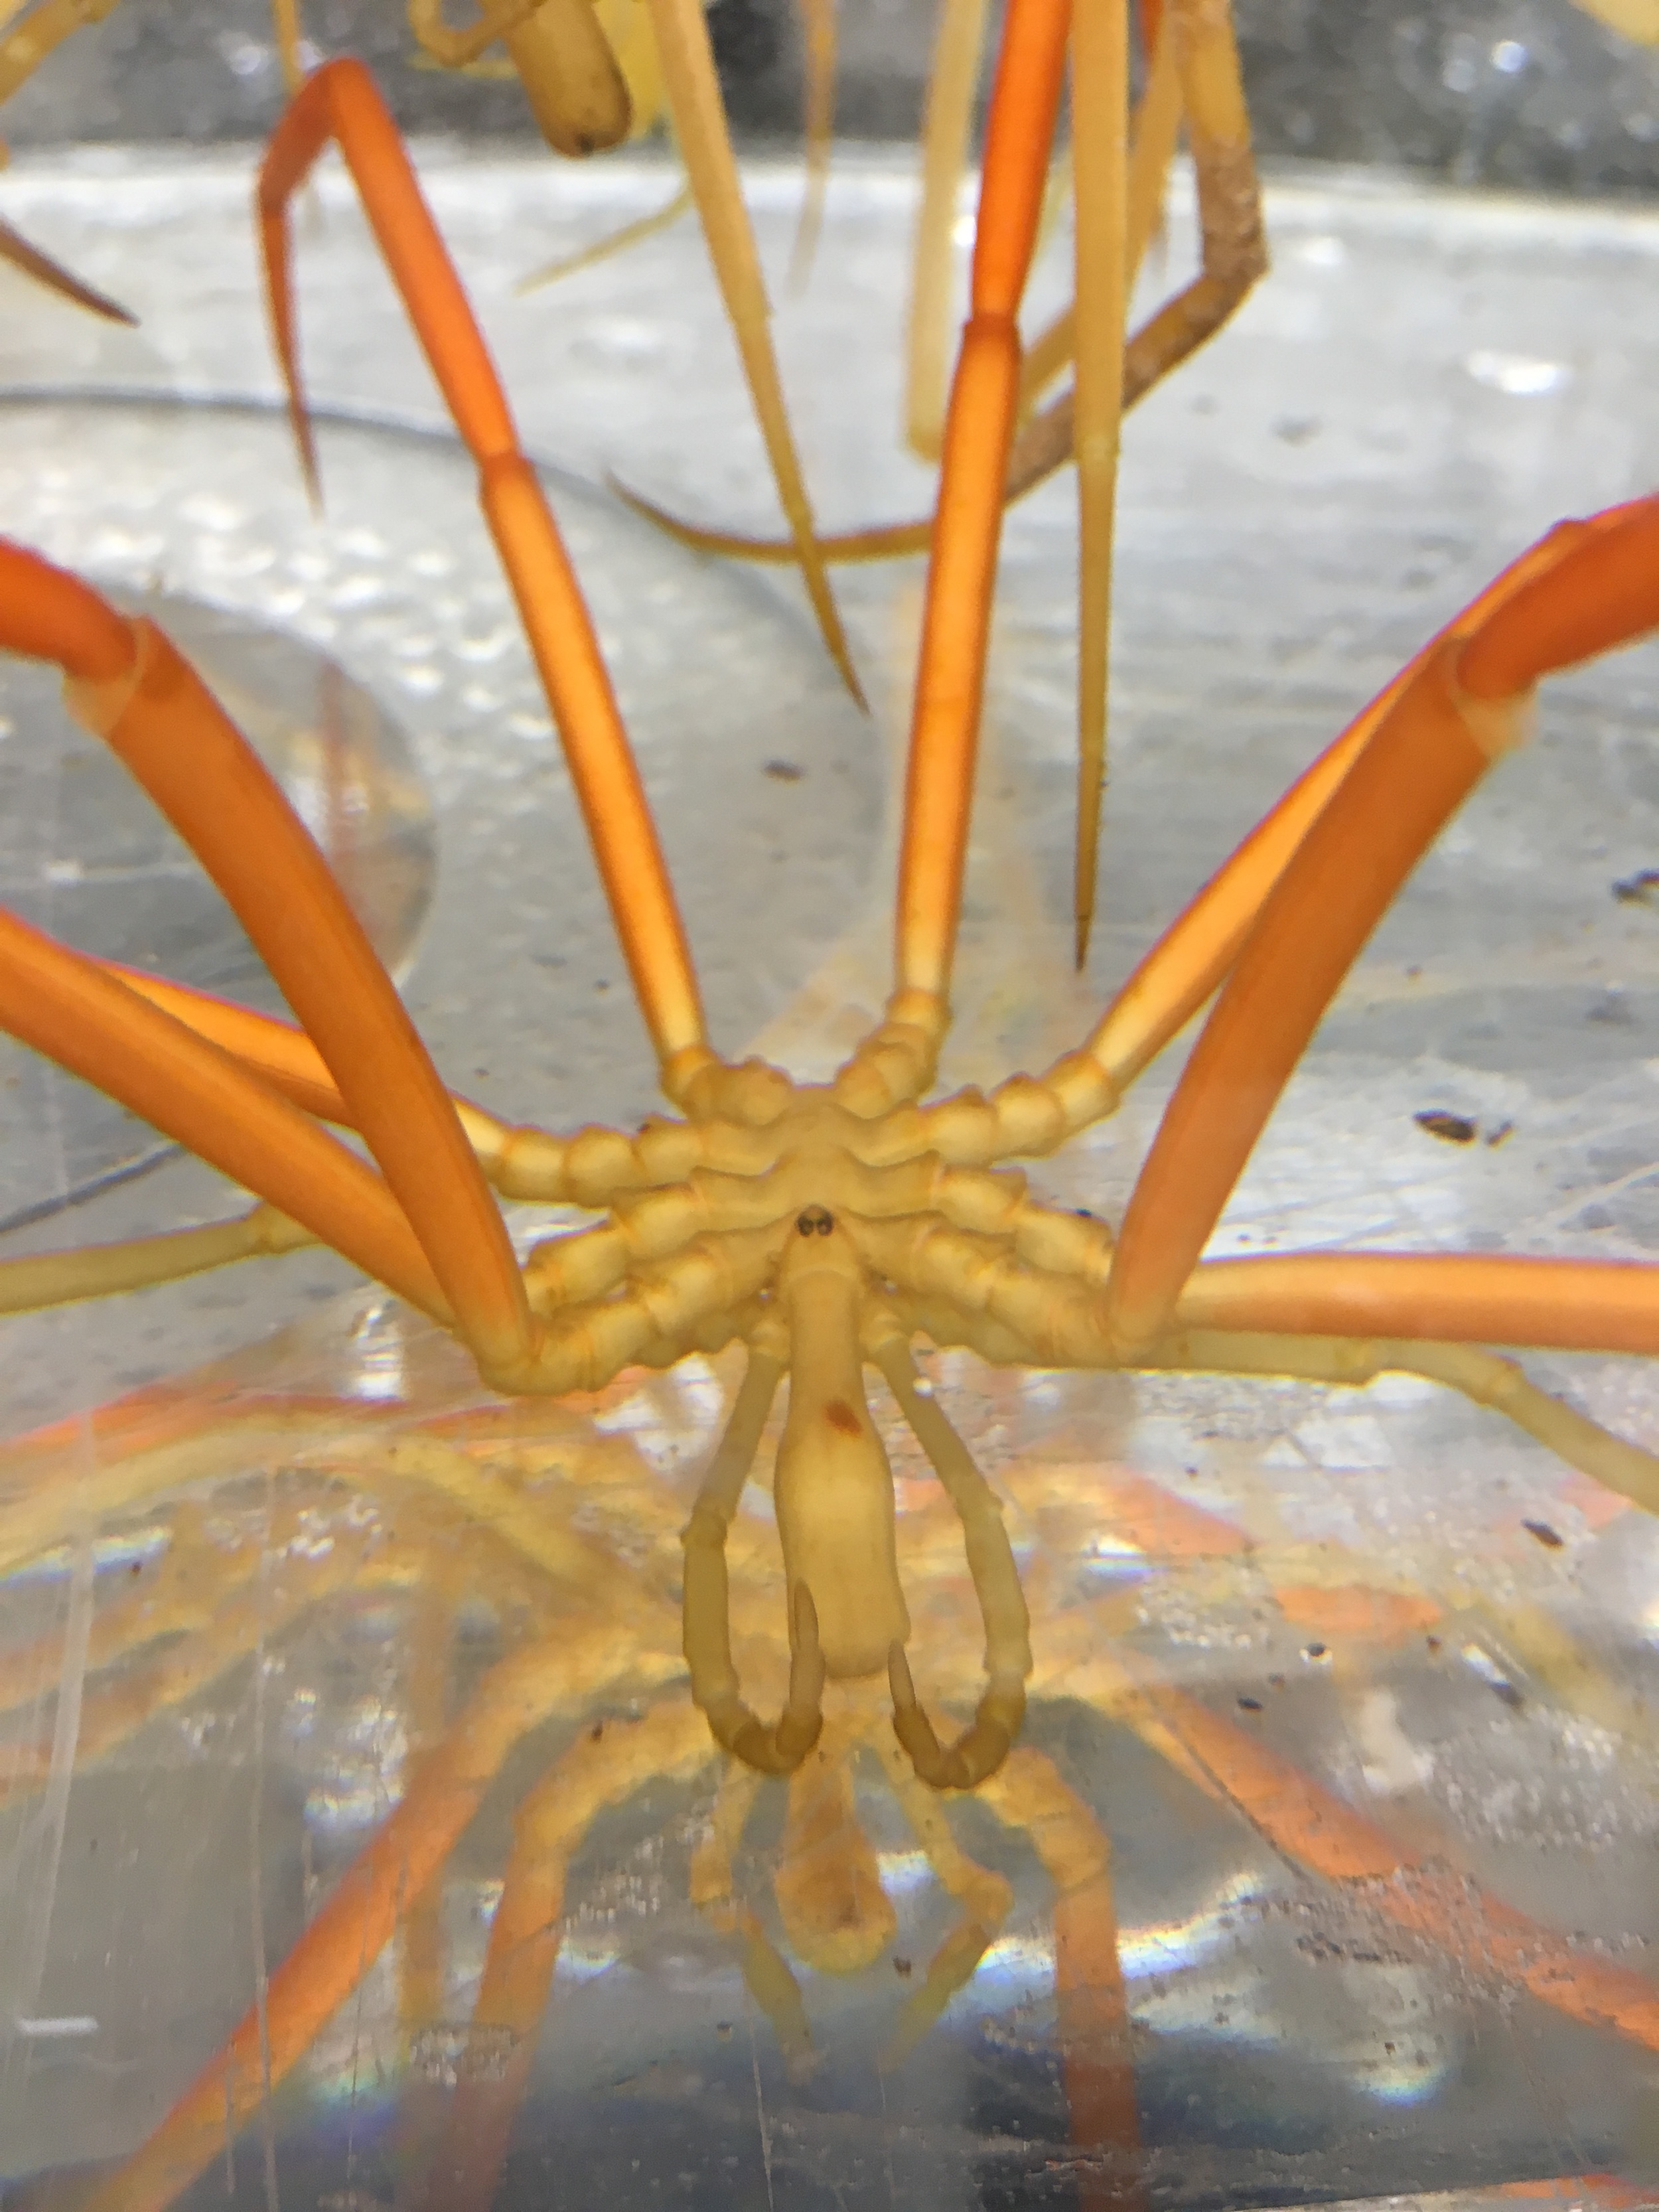  A large specimen of  Colossendeis  - either  C. australis  or  C. scotti .&nbsp; Two of its four eyes are visible on the ocular tubercle on its head.&nbsp; Other appendages visible are the eight walking legs (orange), the pedipalps on either side of